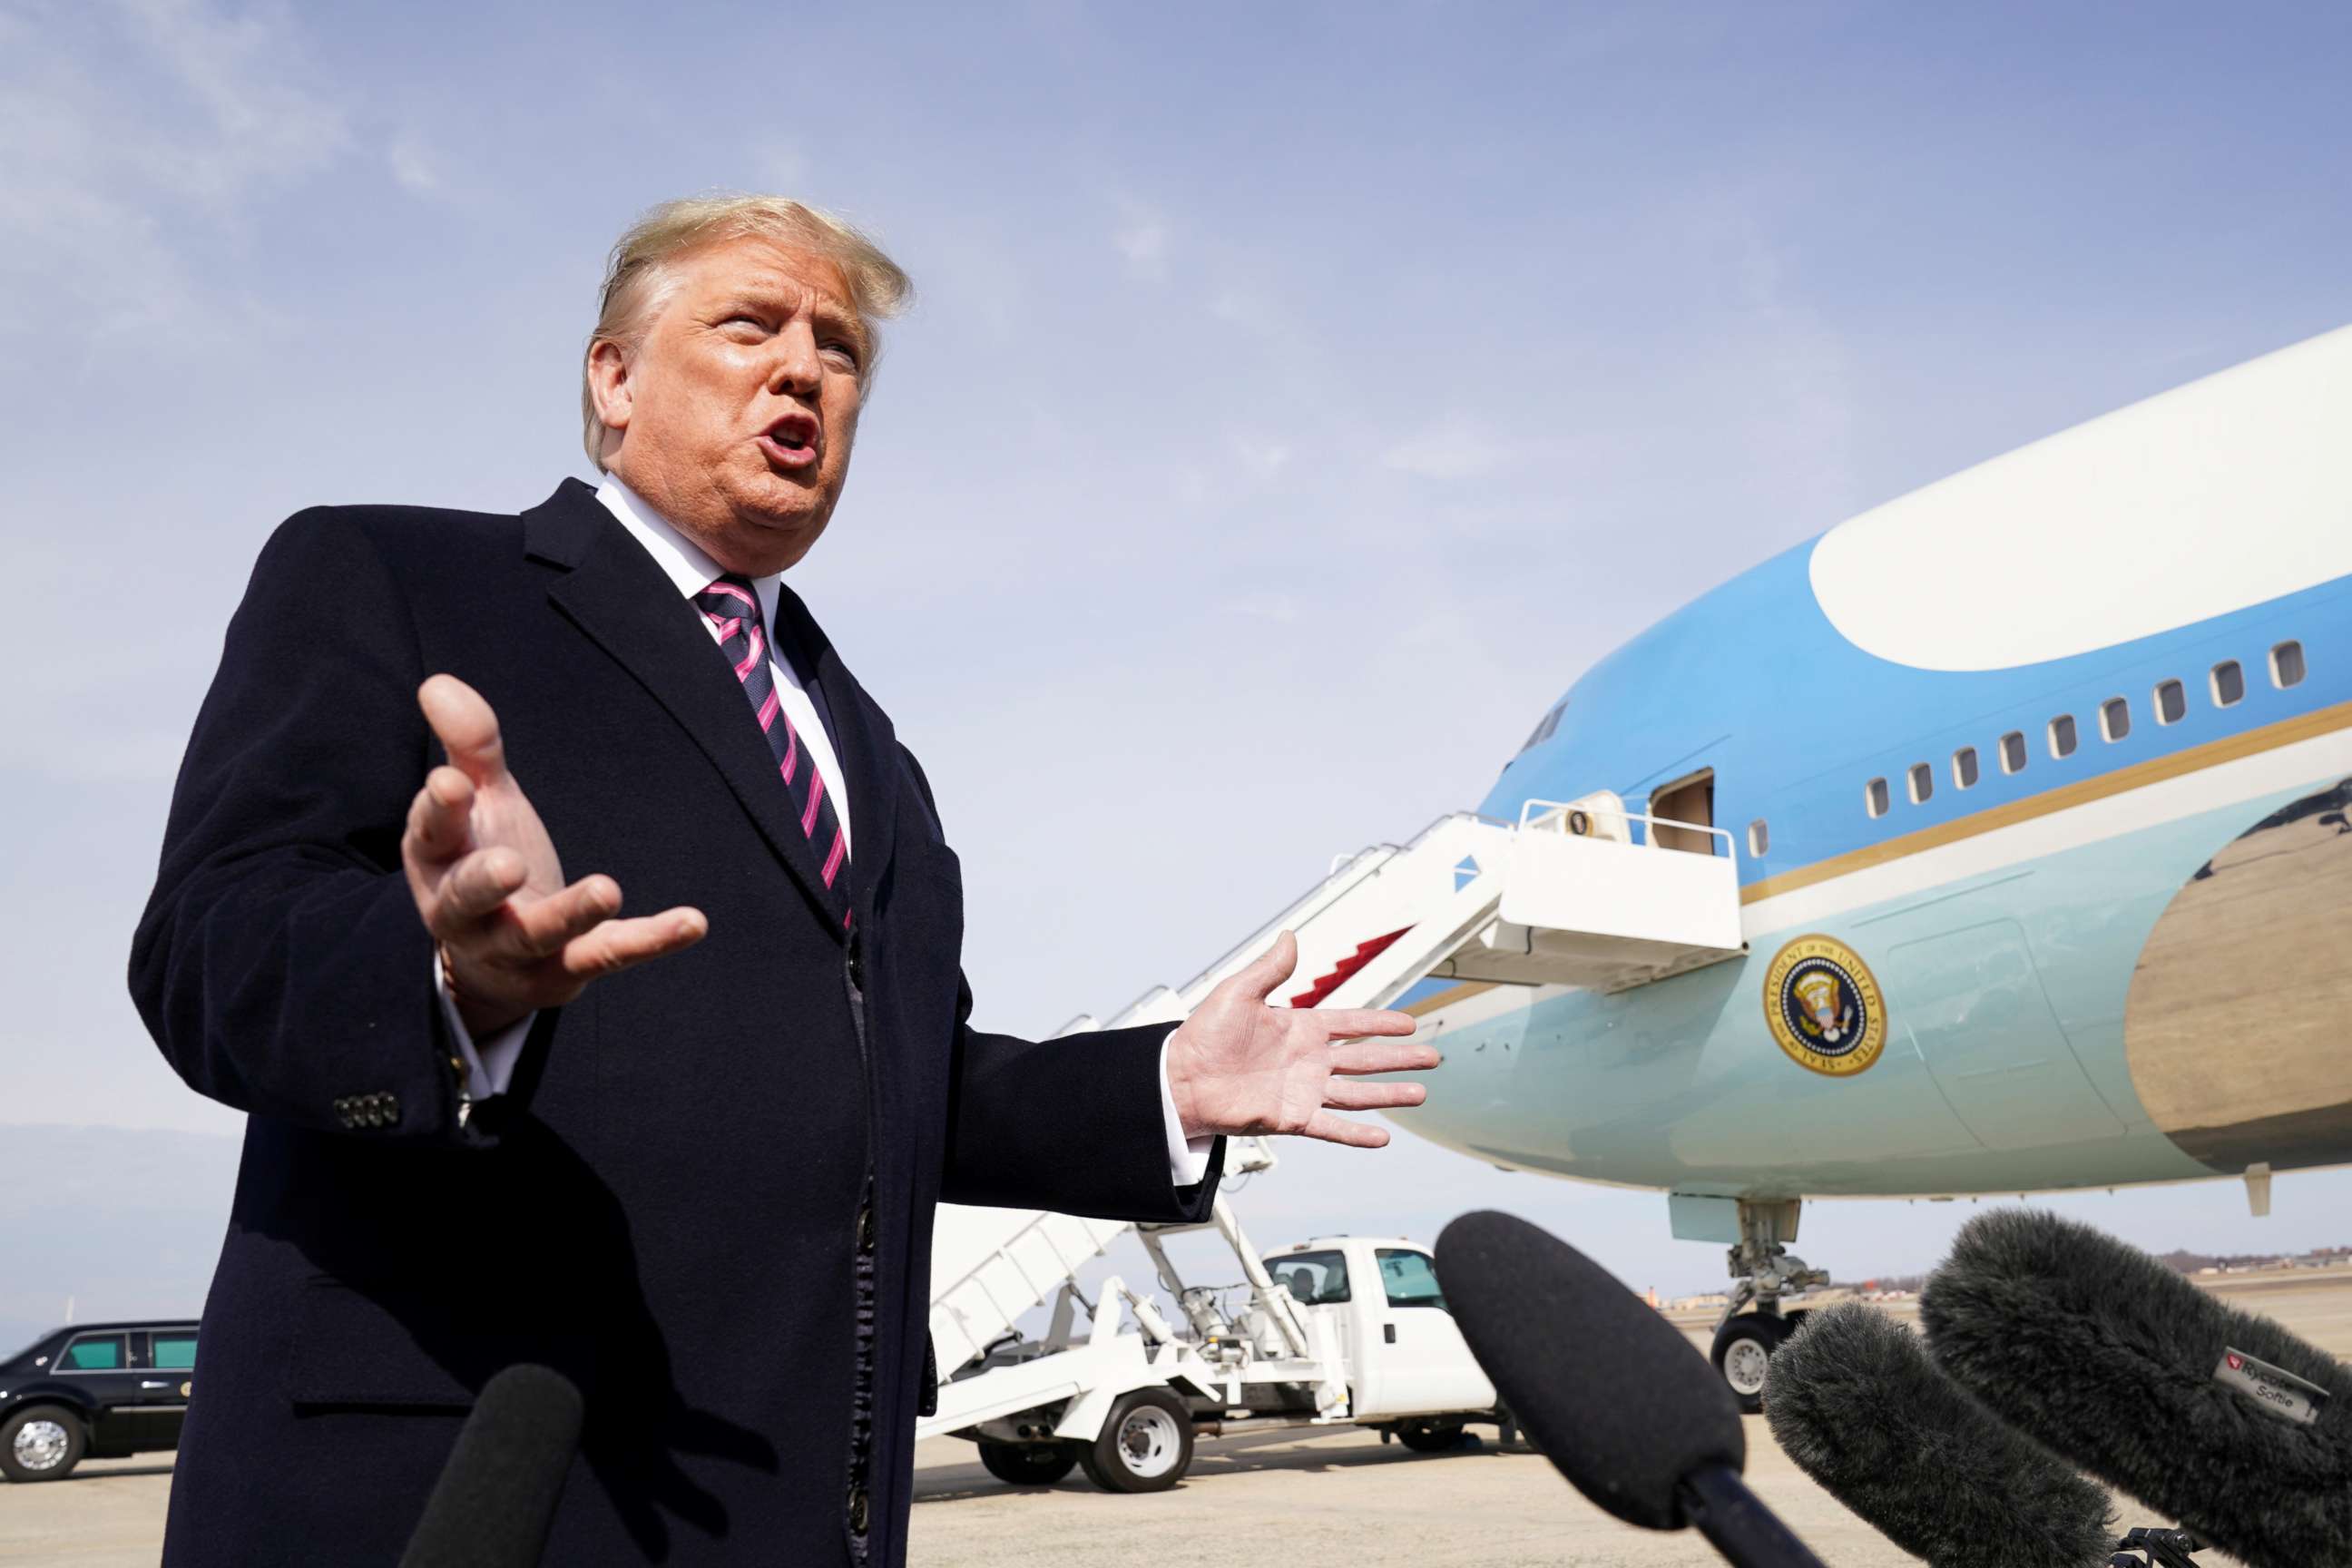 FILE PHOTO: U.S. President Donald Trump talks to reporters prior to boarding Air Force One as he departs Washington for campaign travel to California from Joint Base Andrews in Maryland, U.S., February 18, 2020.